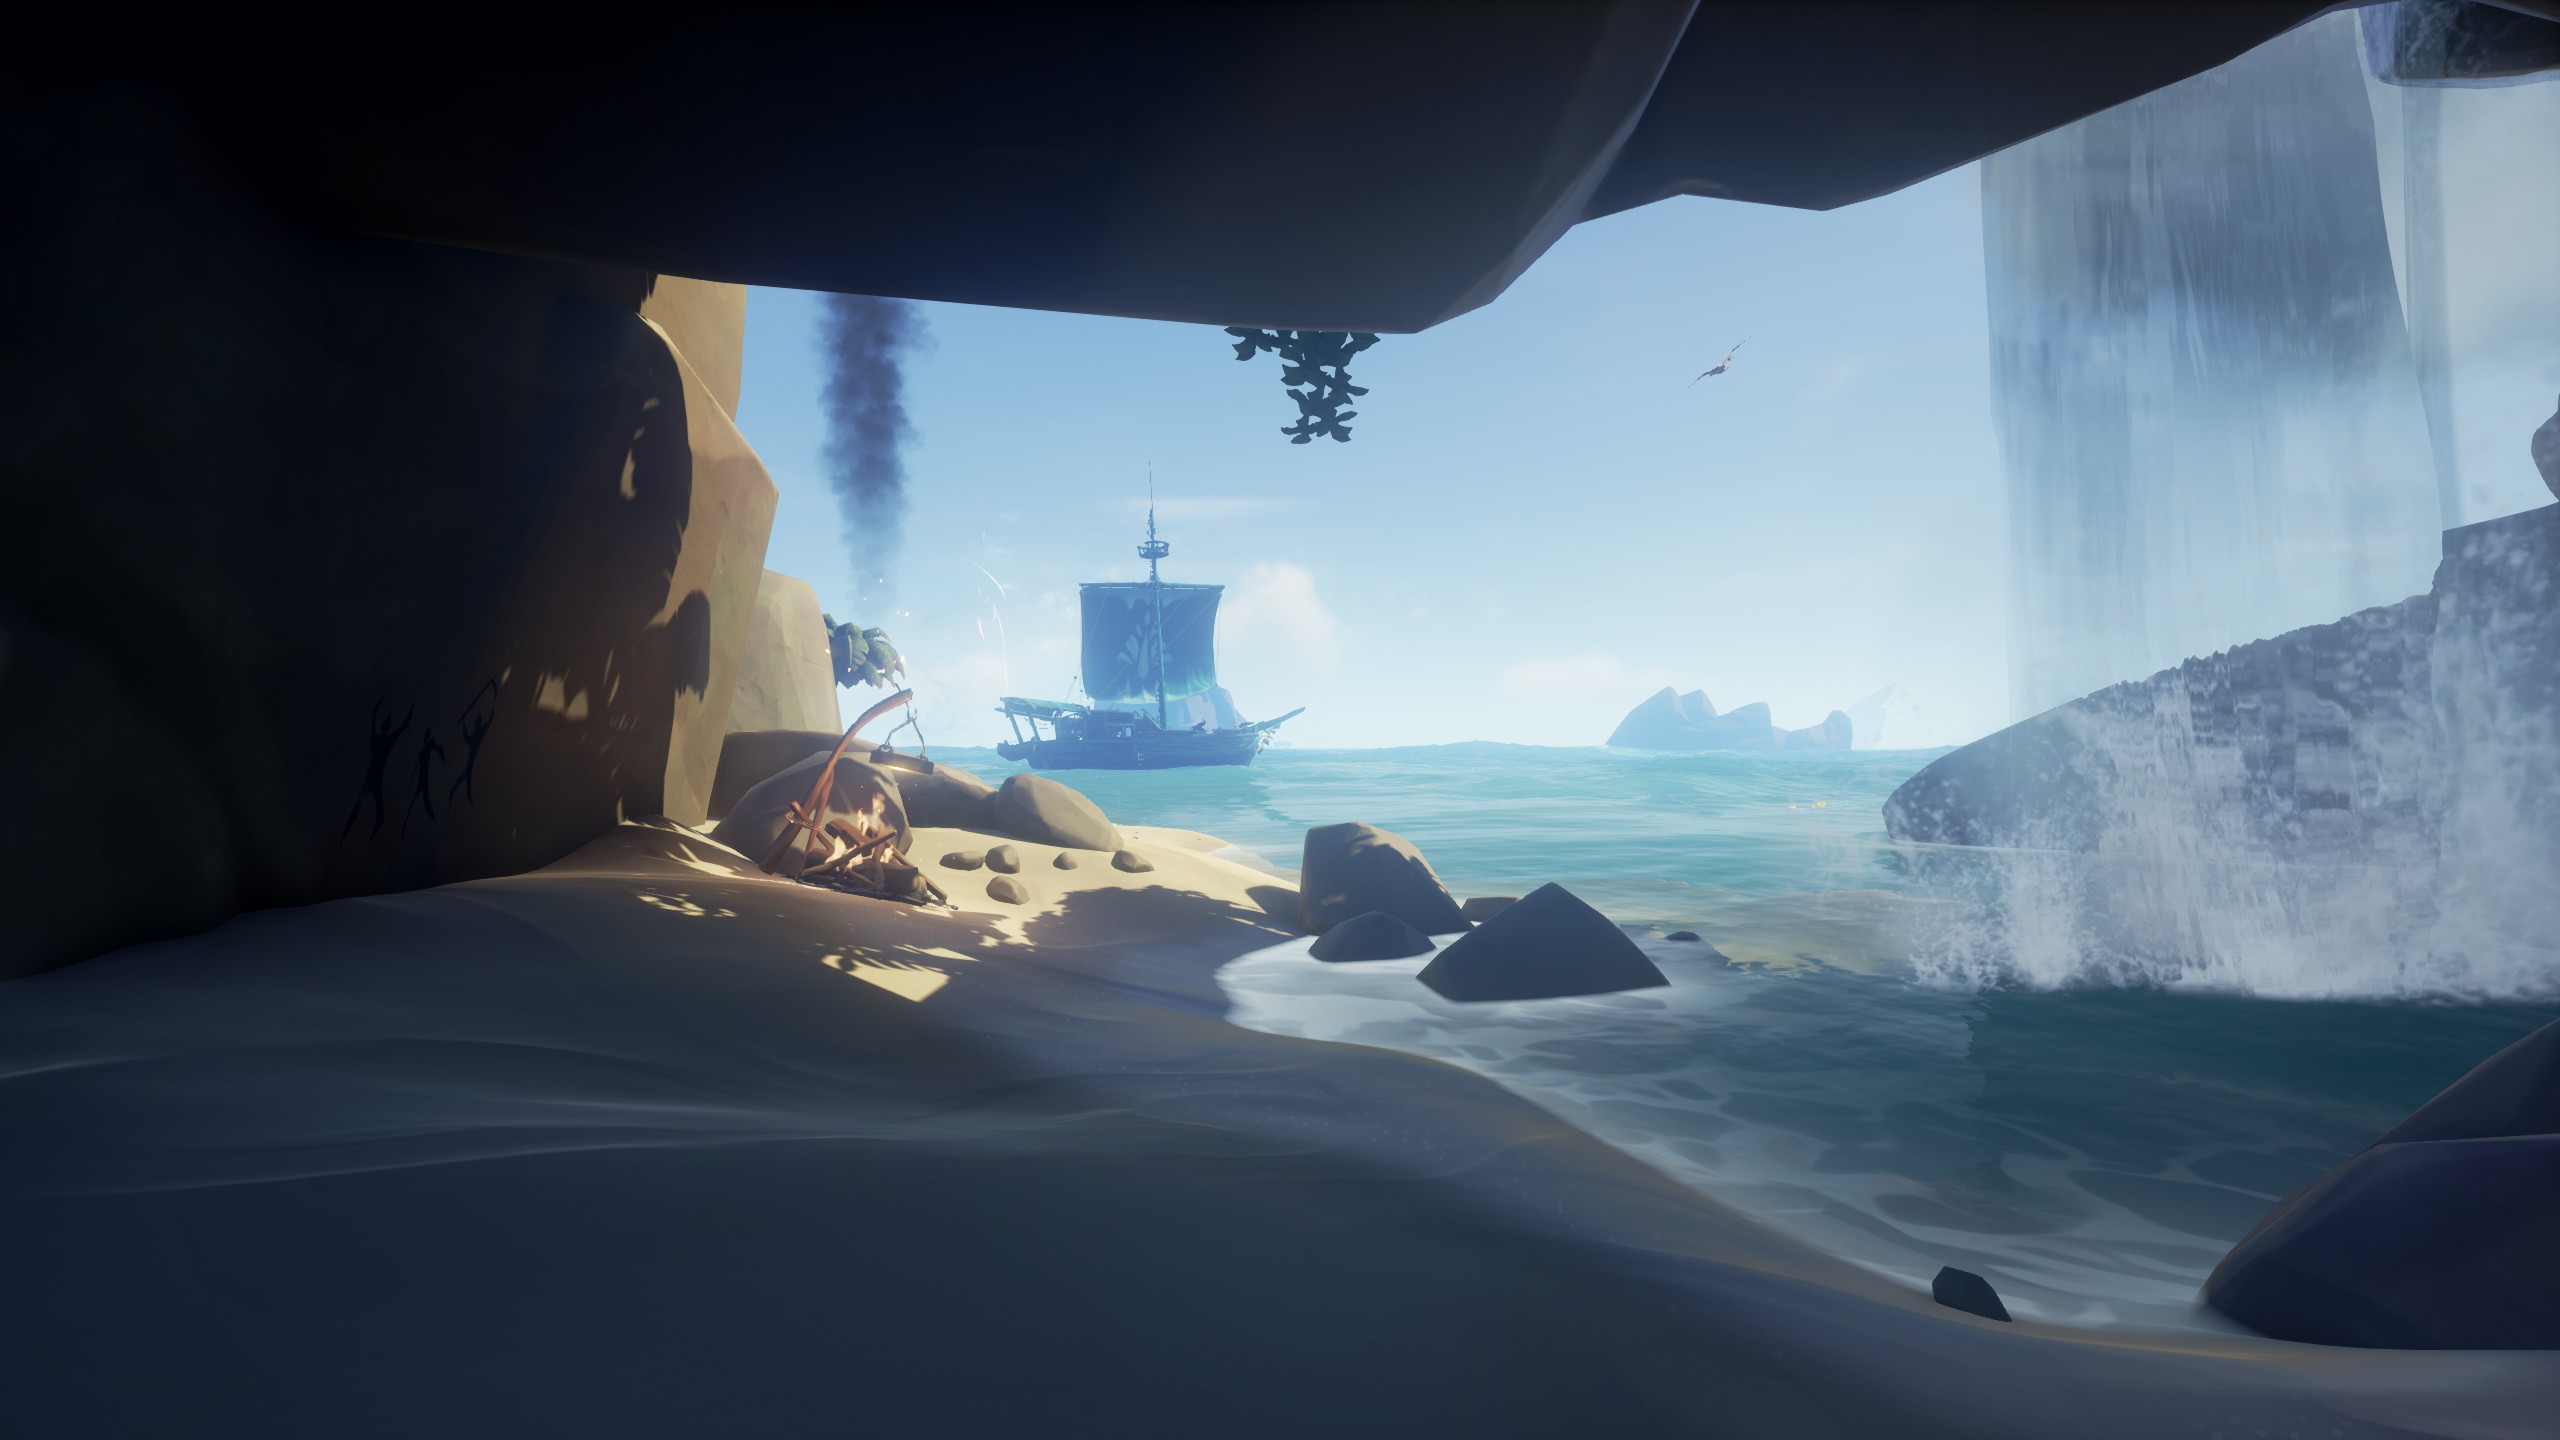 General 2560x1440 Sea of Thieves screen shot water beach boat calm campfire cave waterfall